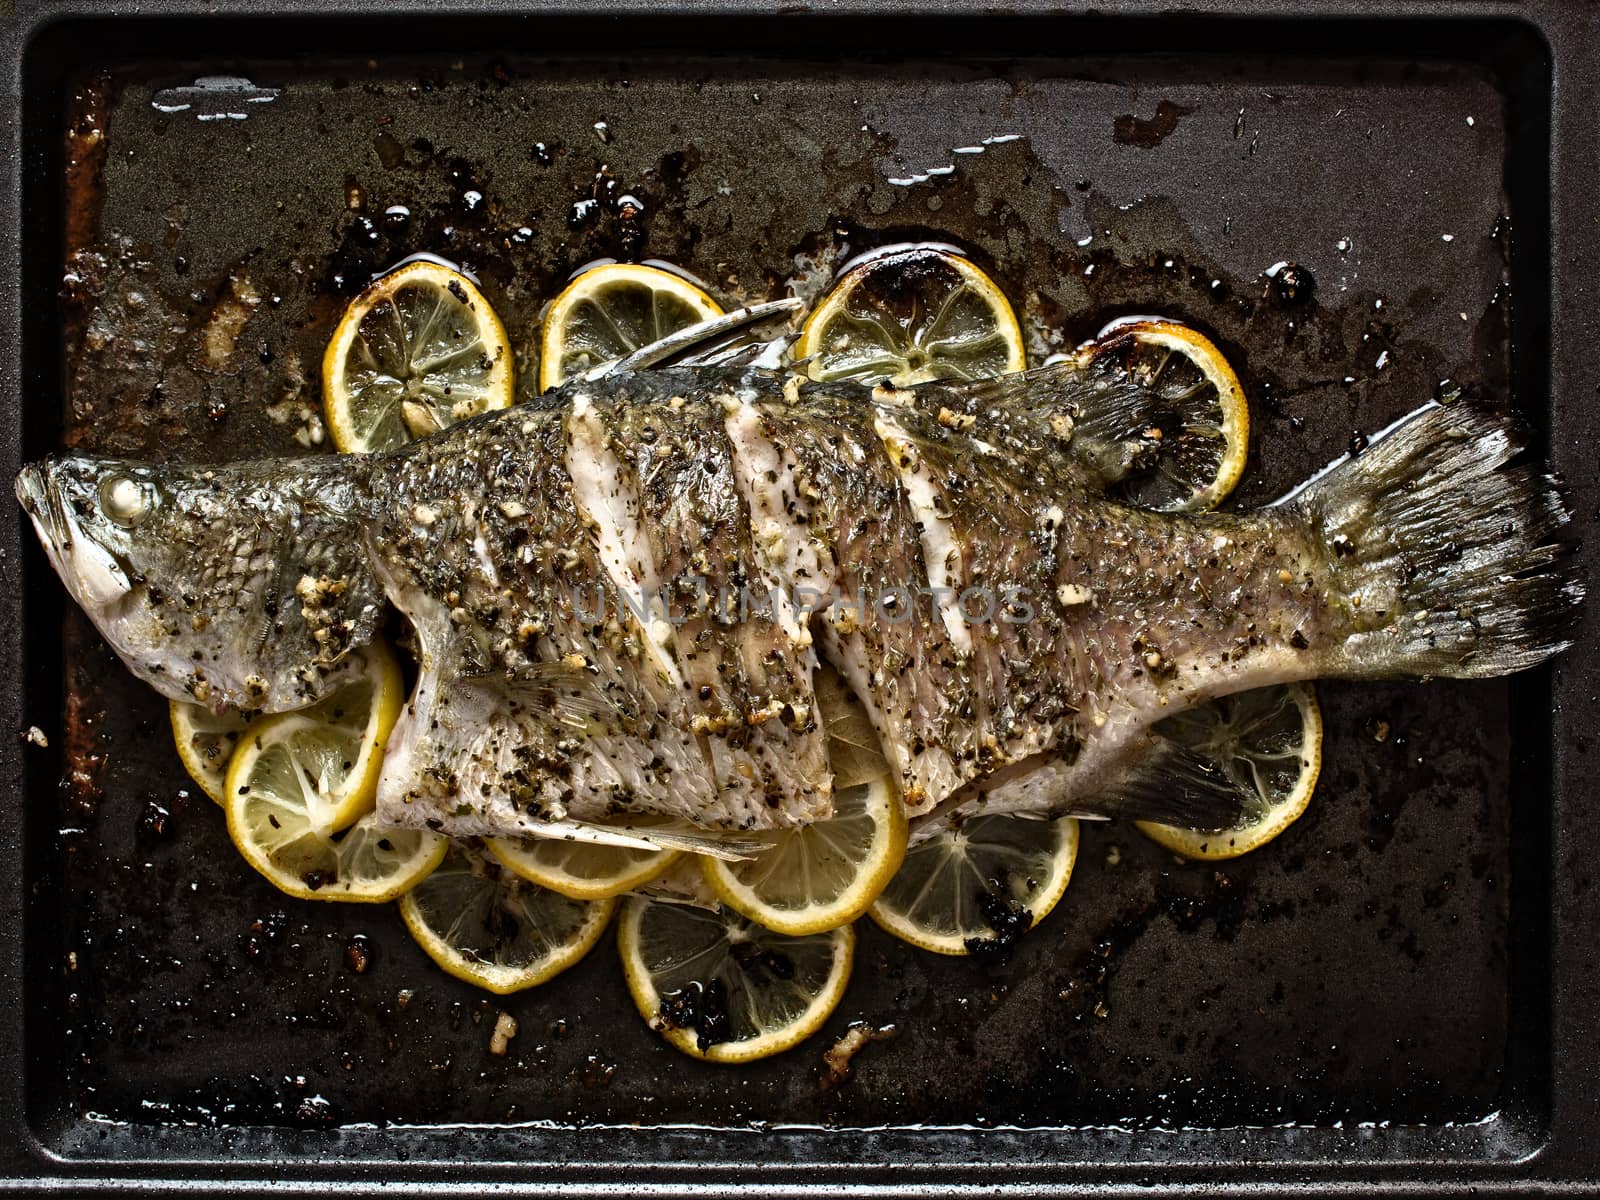 rustic baked fish by zkruger